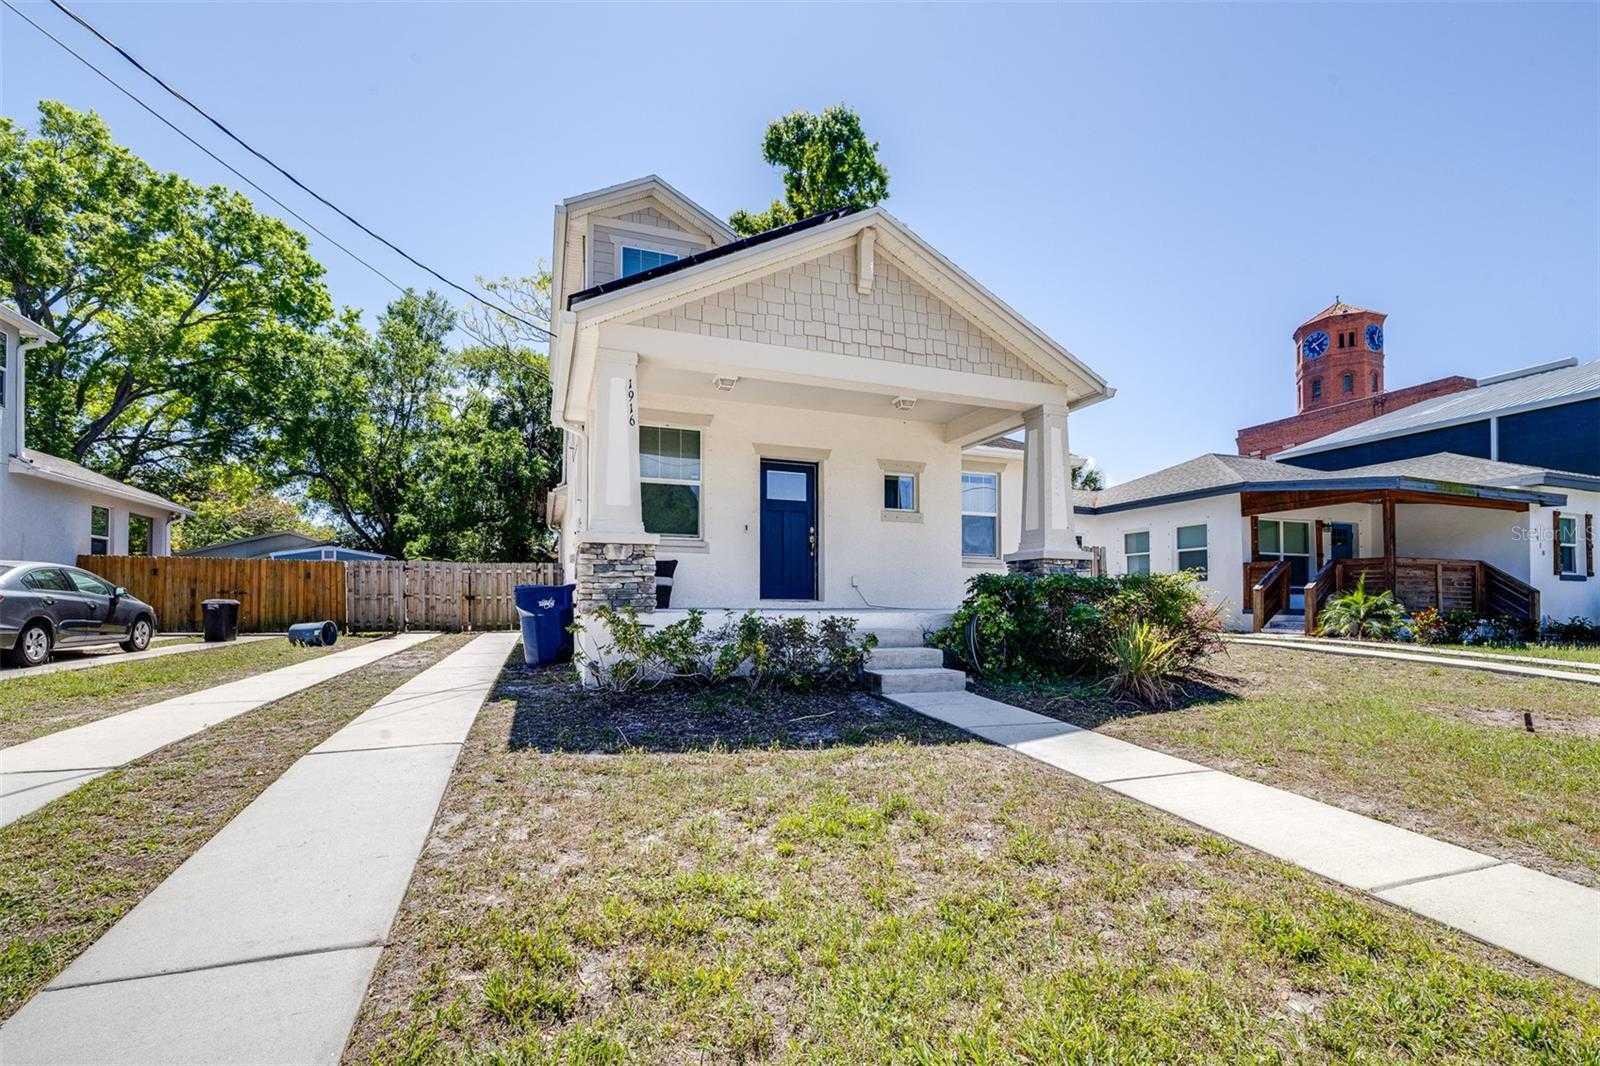 1916 W PALMETTO STREET, TAMPA, Single-Family Home,  for sale, InCom Real Estate - Sample Office 